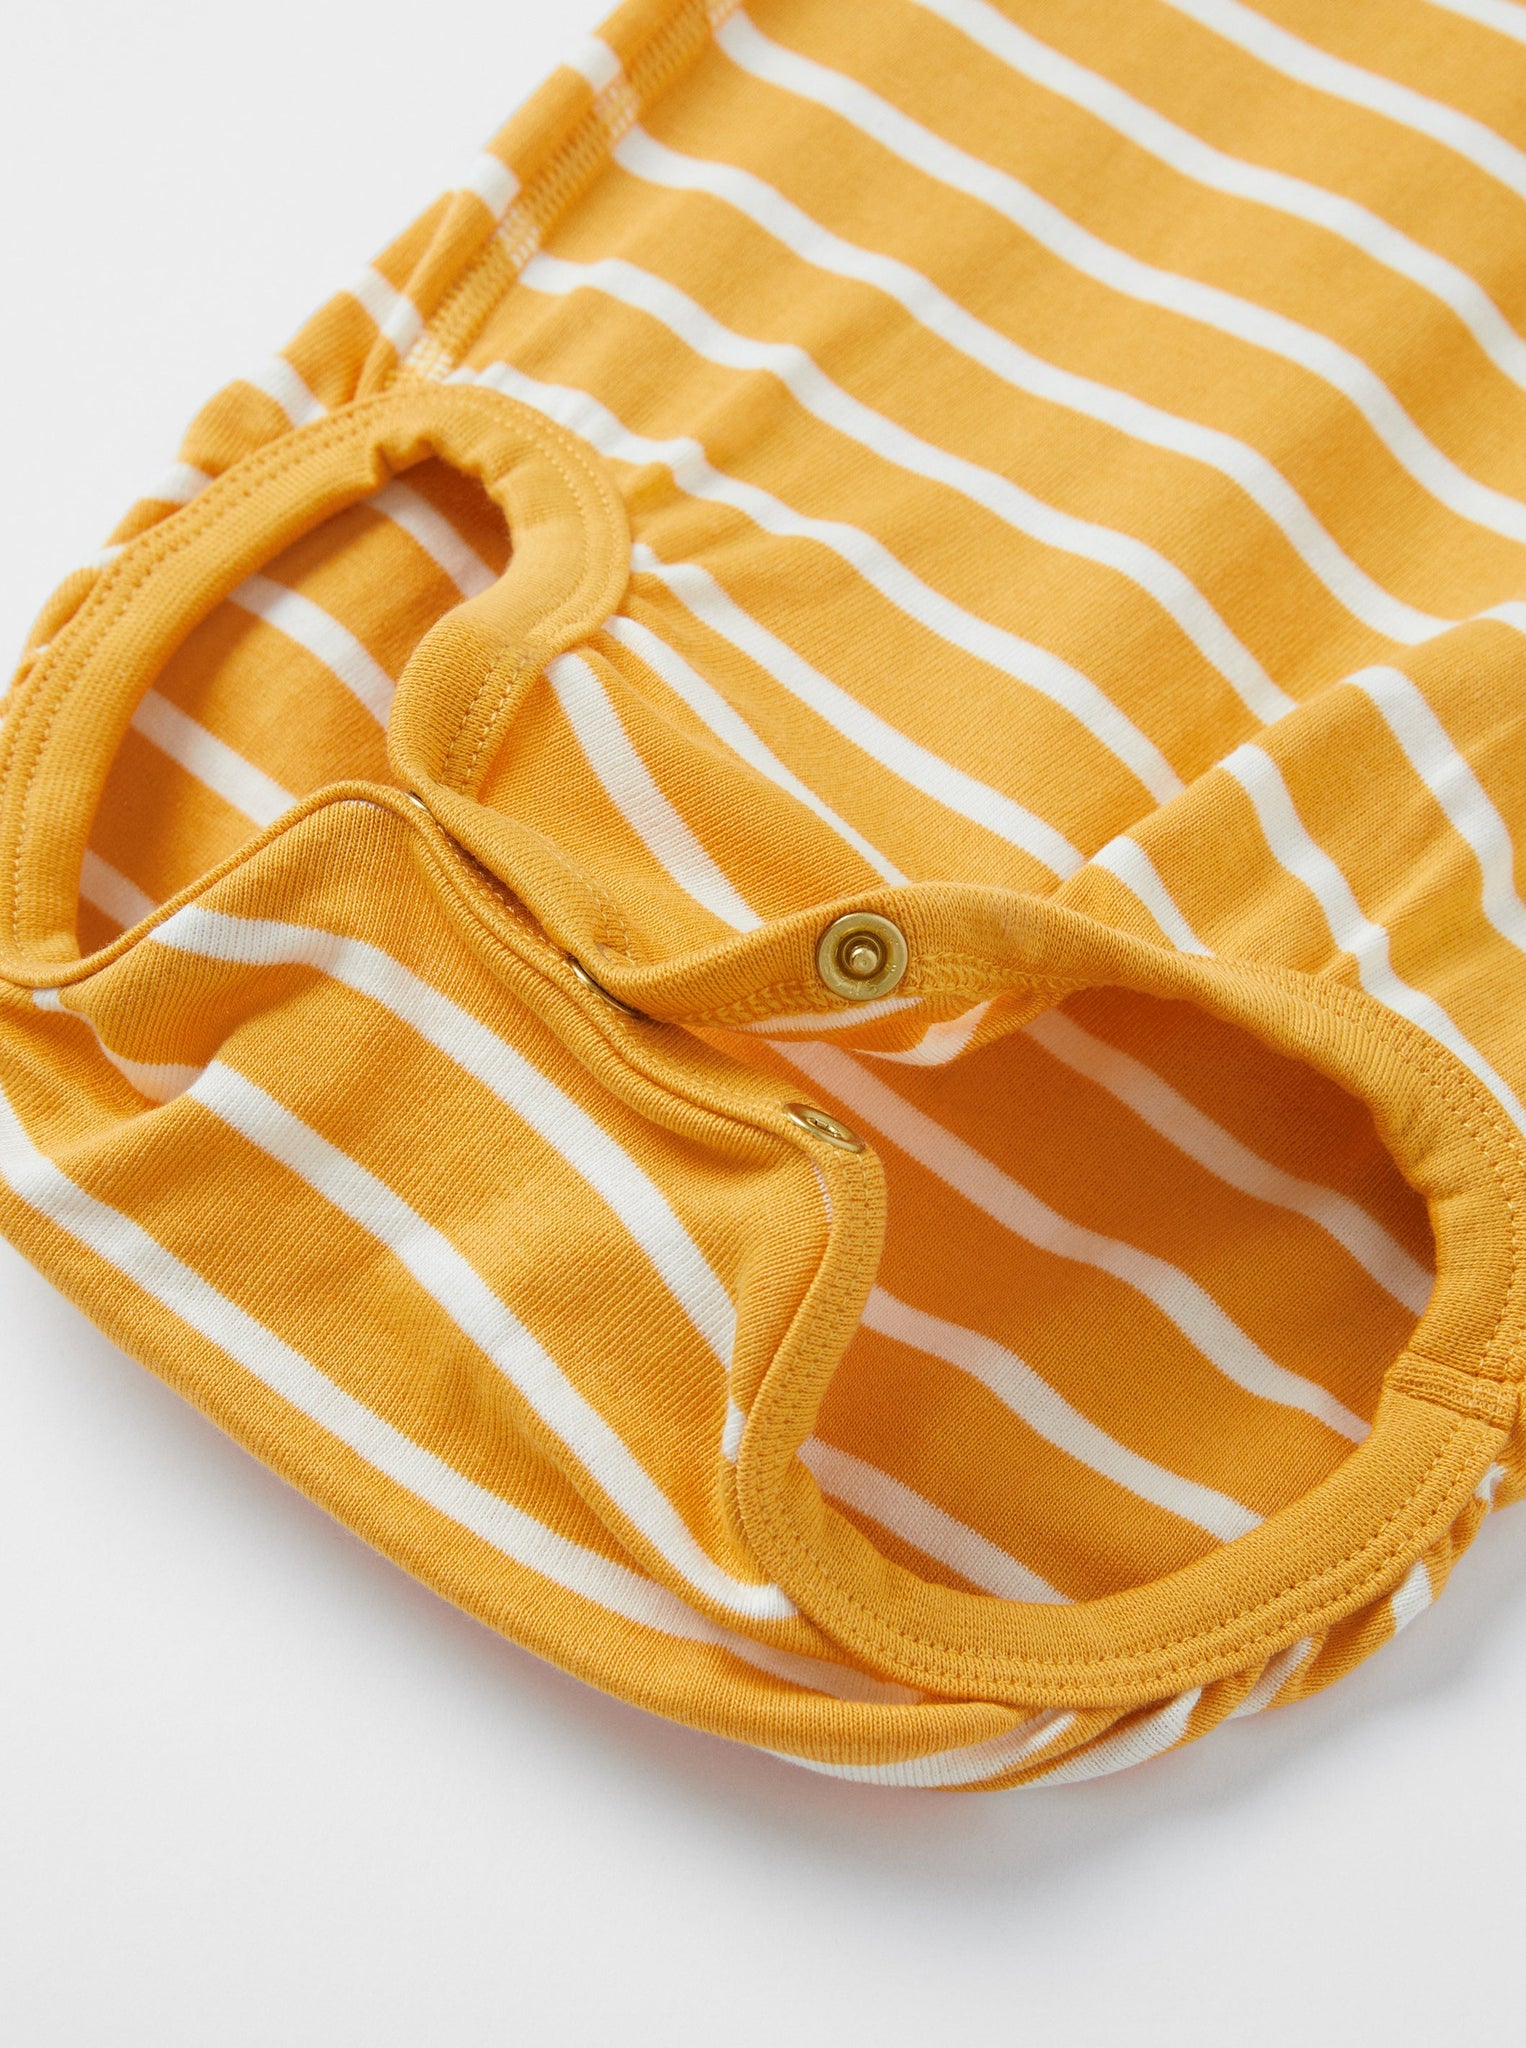 Striped Organic Cotton Yellow Babygrow from the Polarn O. Pyret babywear collection. The best ethical baby clothes